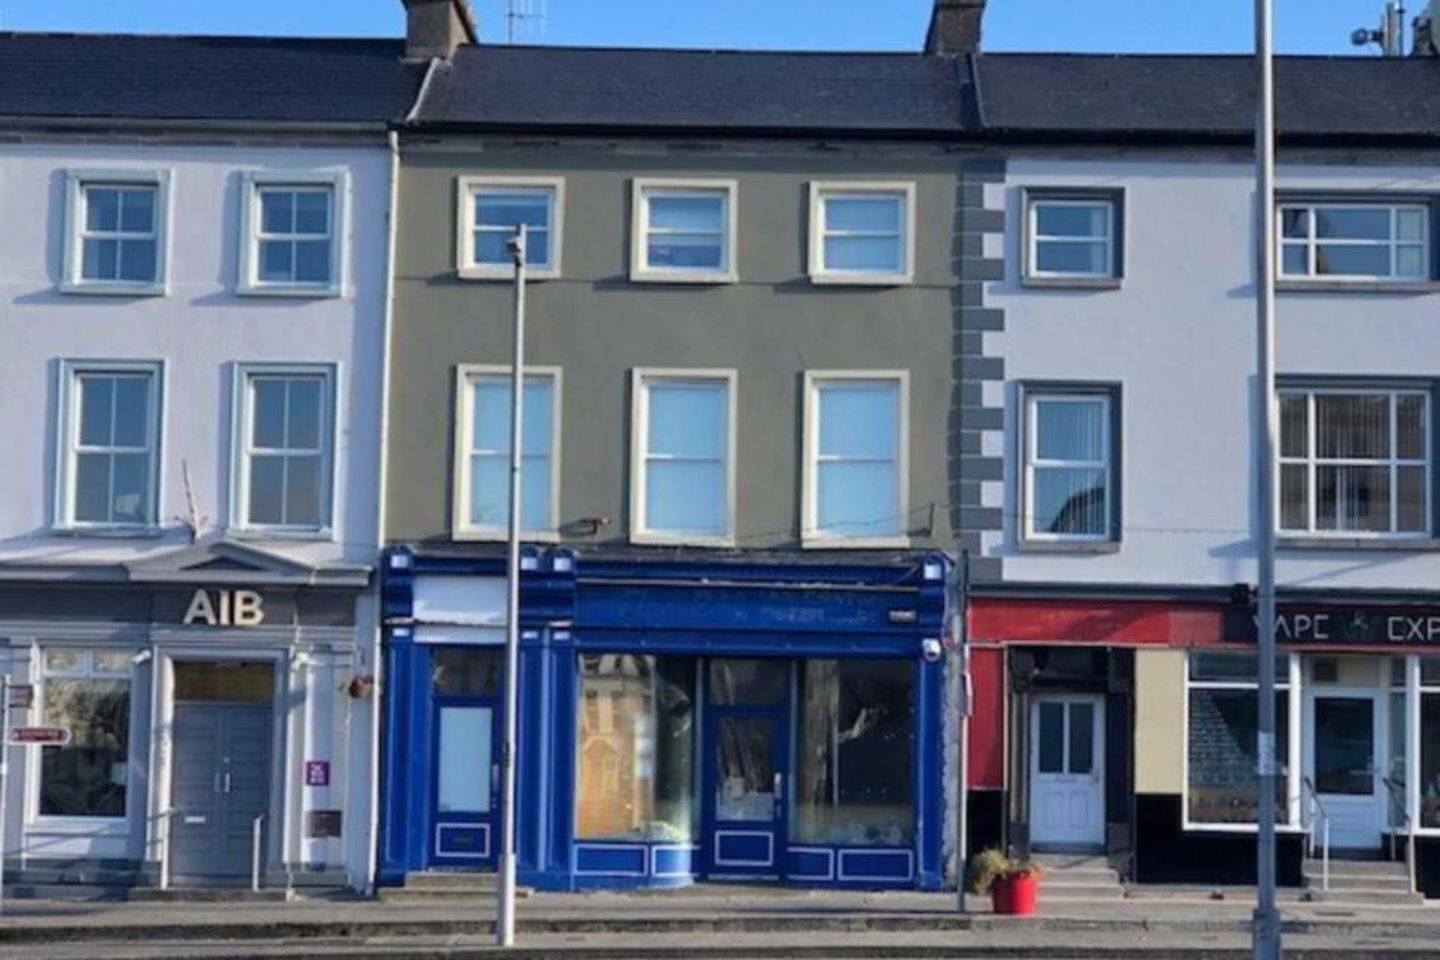 Retail/Commercial Premises, The Square, Gort, Co. Galway